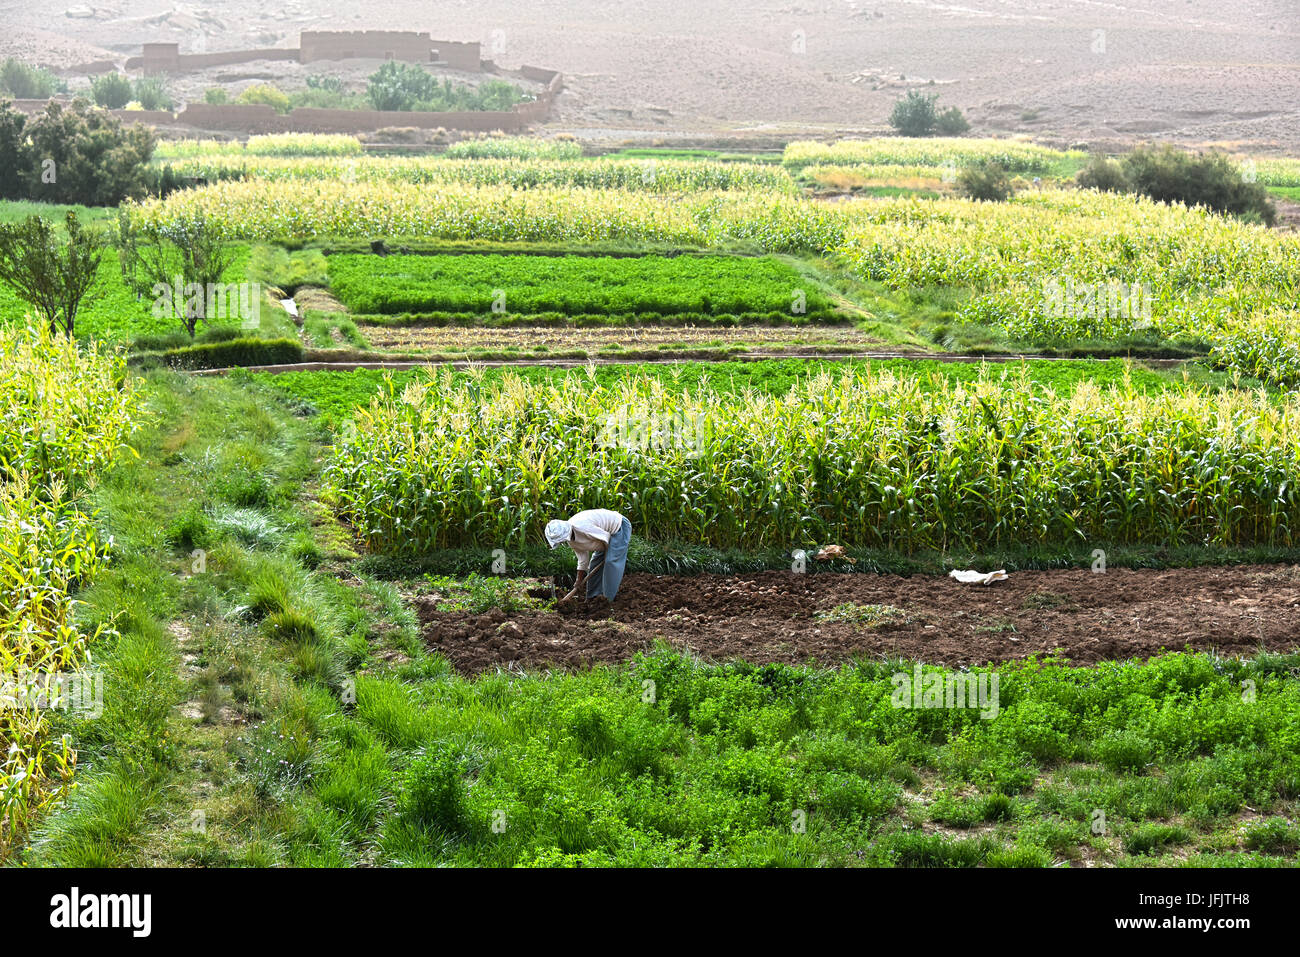 Self-sufficient labor-intensive farming in Morocco. Traditional sustainable agriculture. Stock Photo